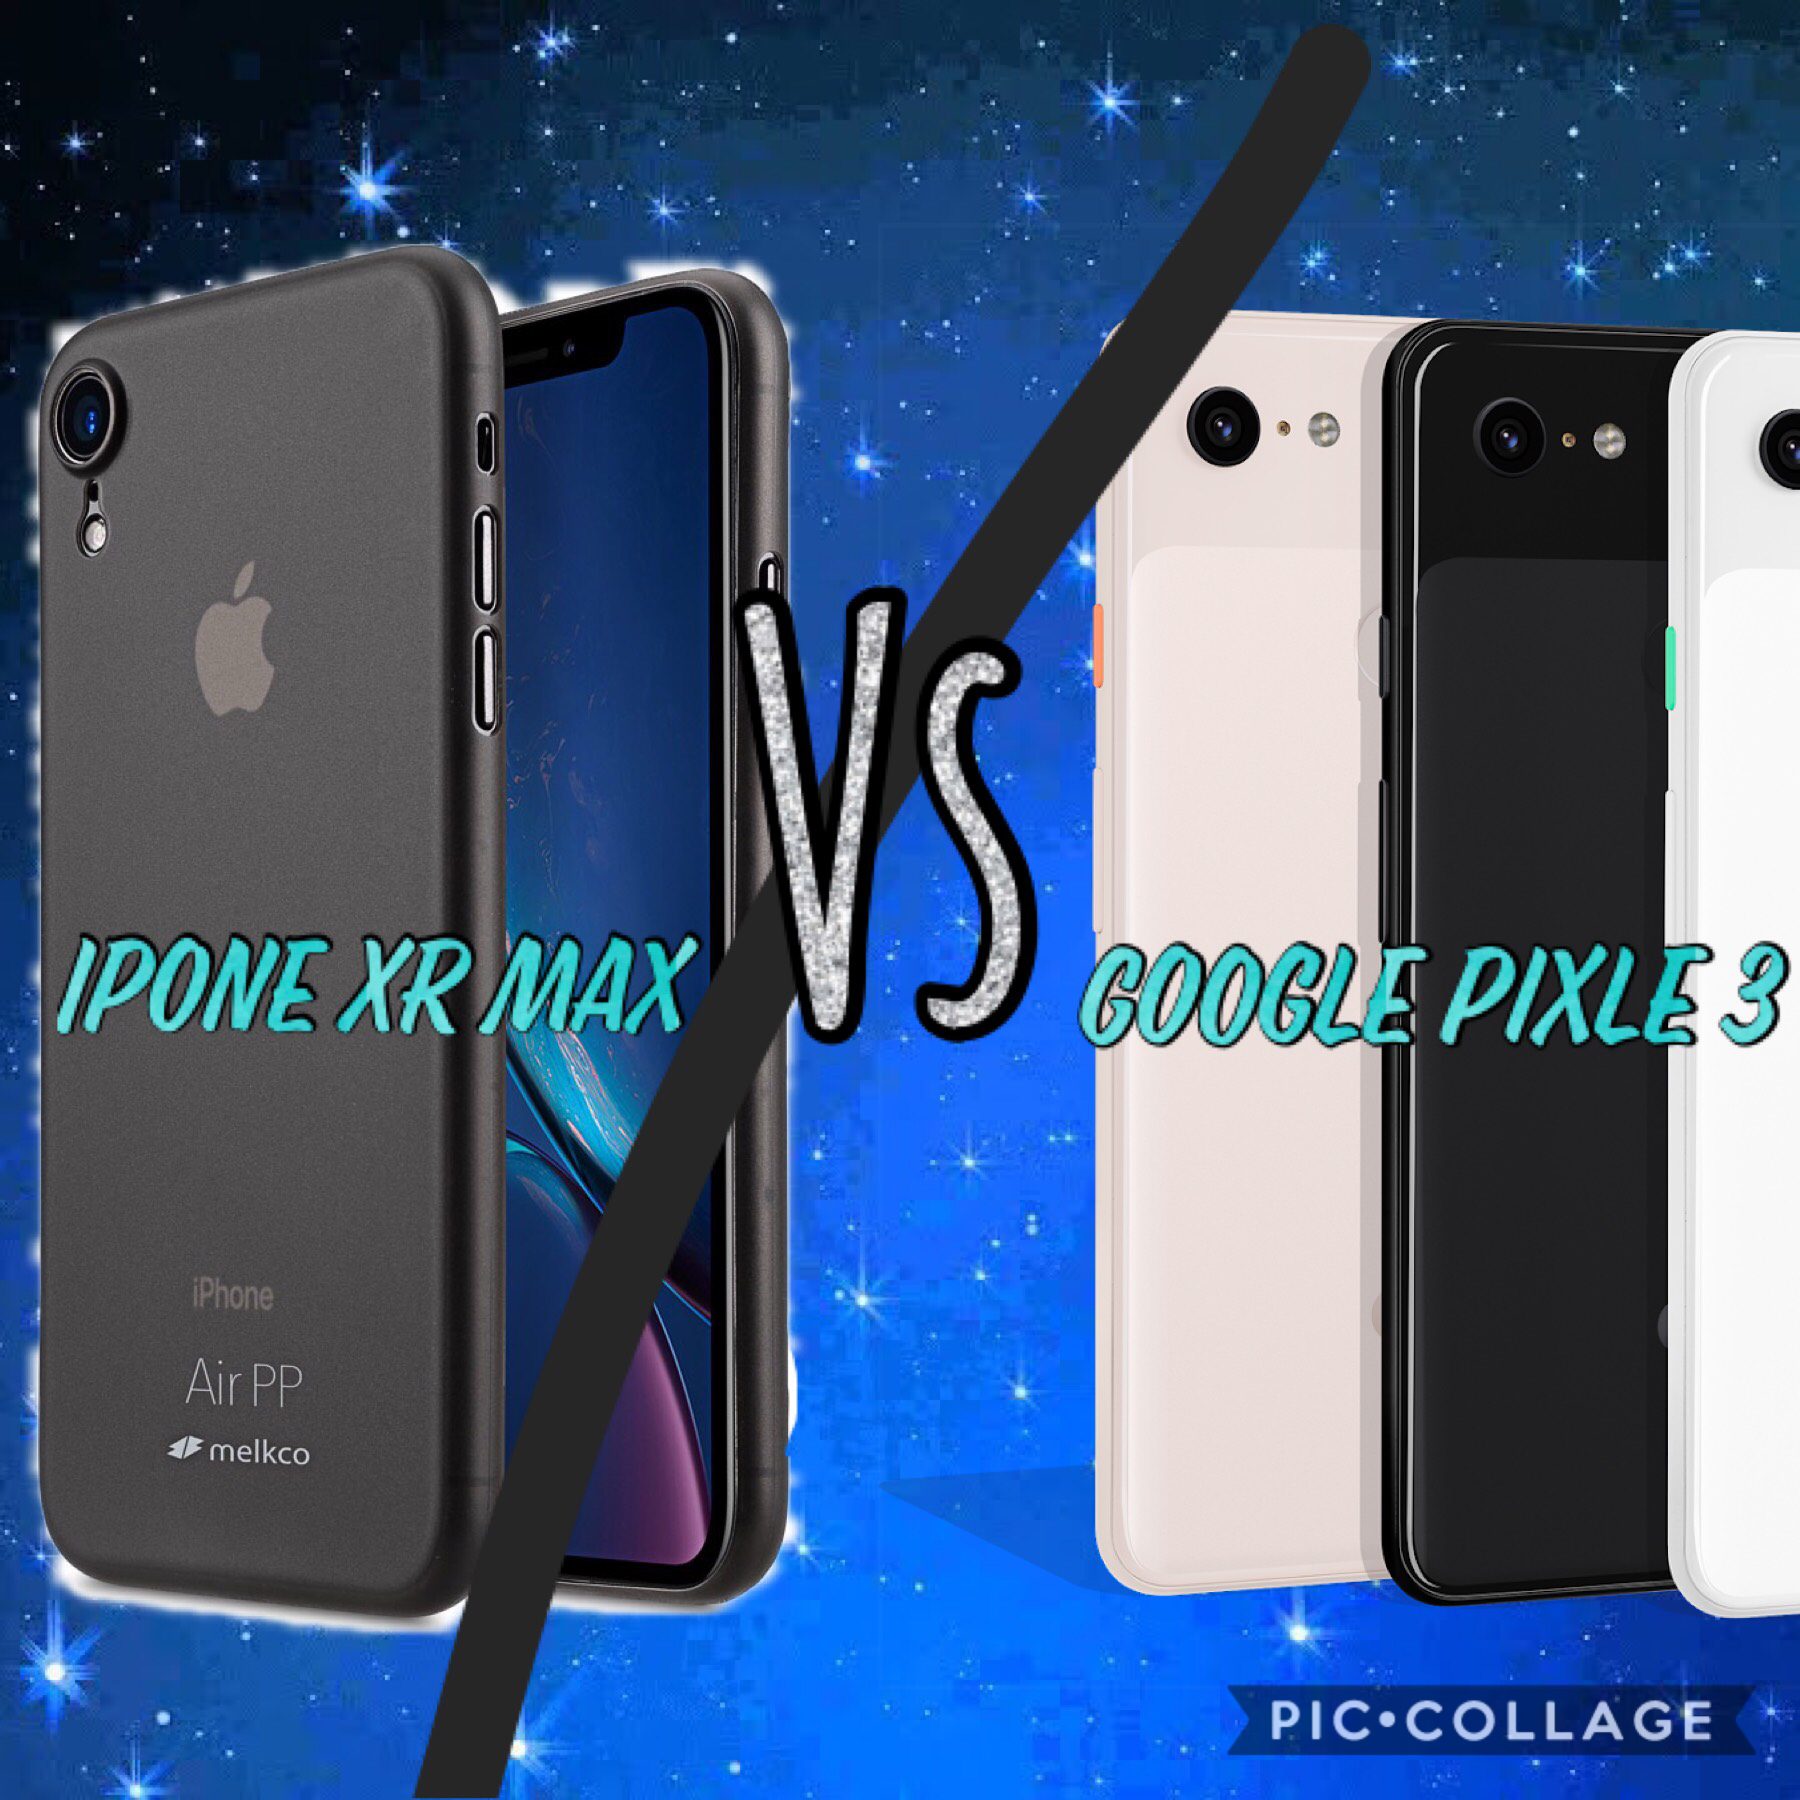 📱tap📱
Which would u rather? iPhone XR max or Google Pixel 3? Comment to let me know. CraftyBirdyx 